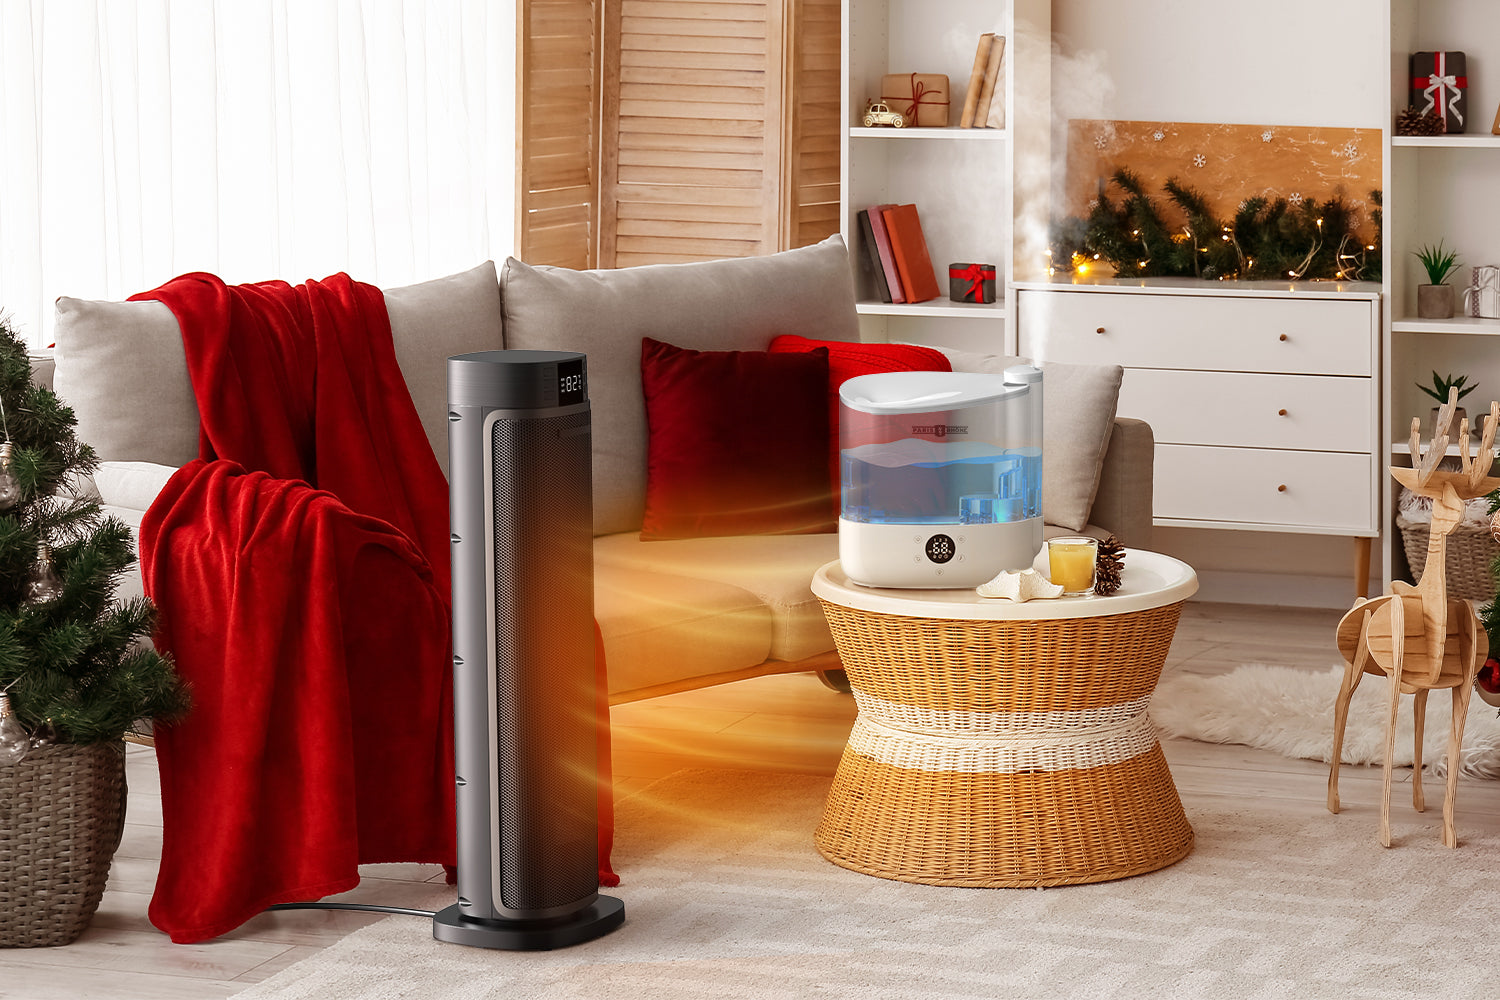 Stay Warm and Cozy: How a Humidifier and Heater Can Improve Winter Comfort